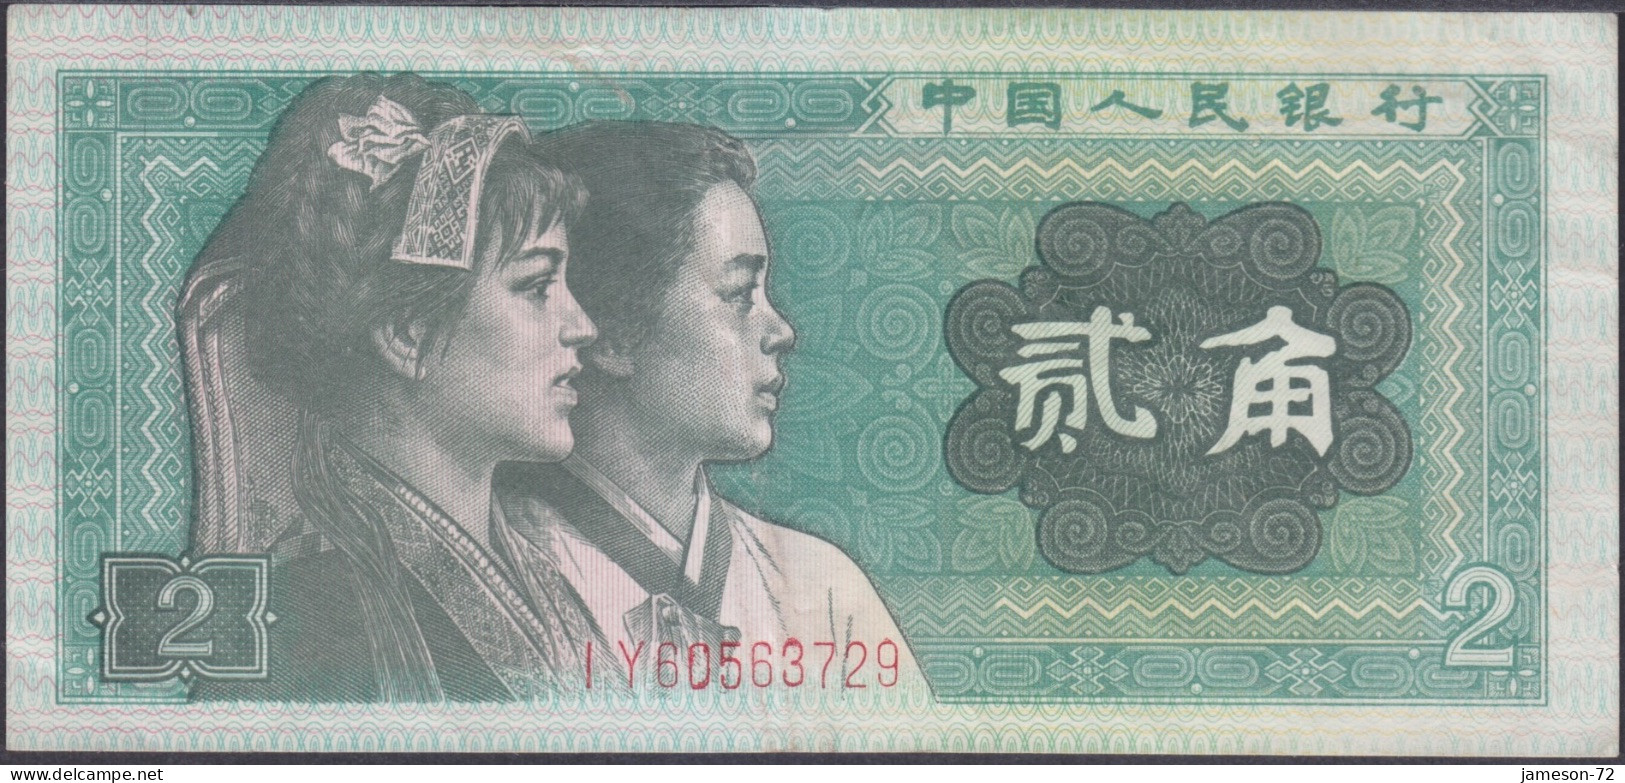 CHINA - 2 Jiao 1980 P# 881a Asia Banknote - Edelweiss Coins - China